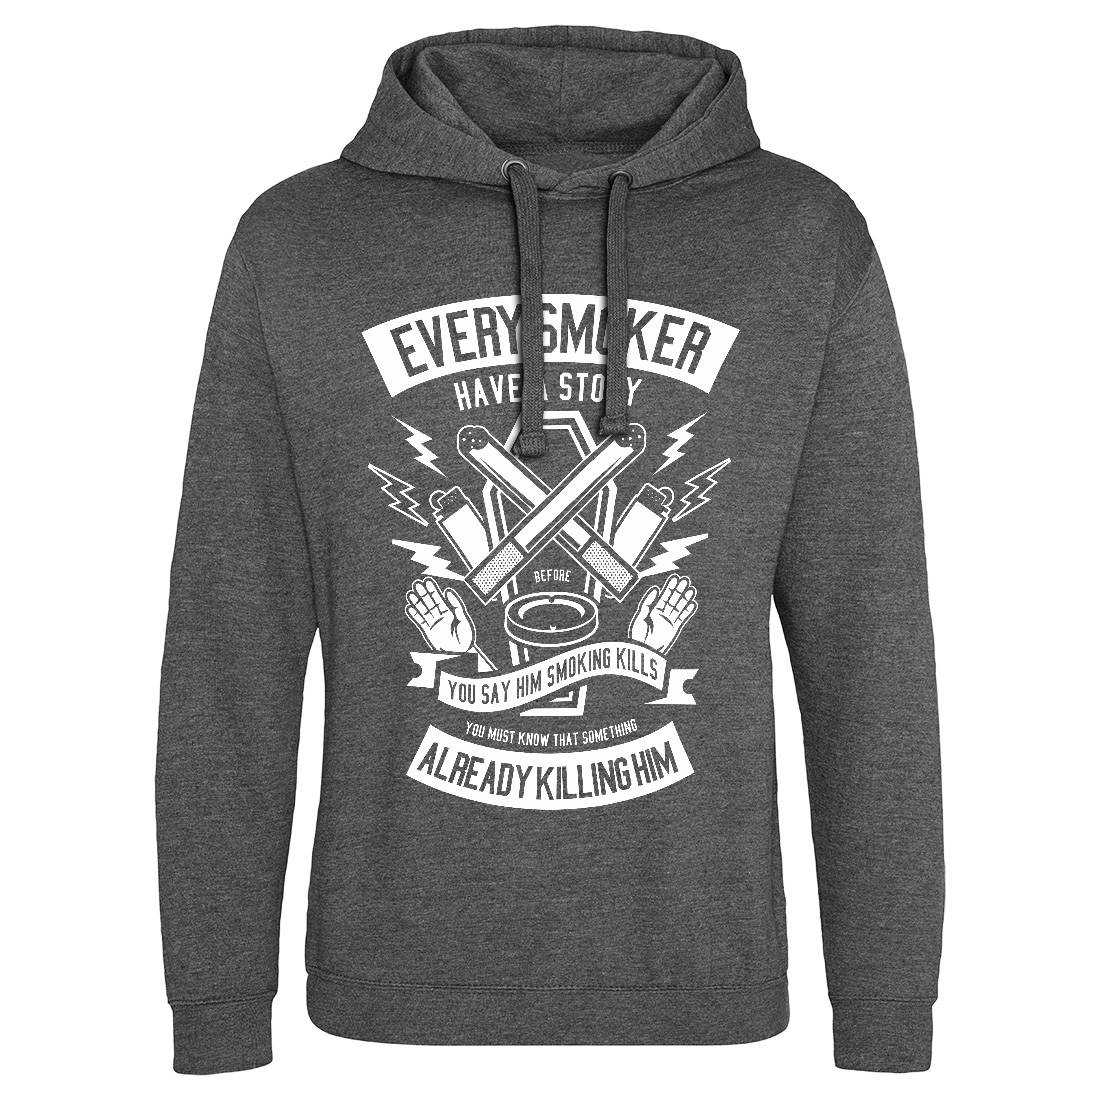 Every Smoker Mens Hoodie Without Pocket Quotes A227